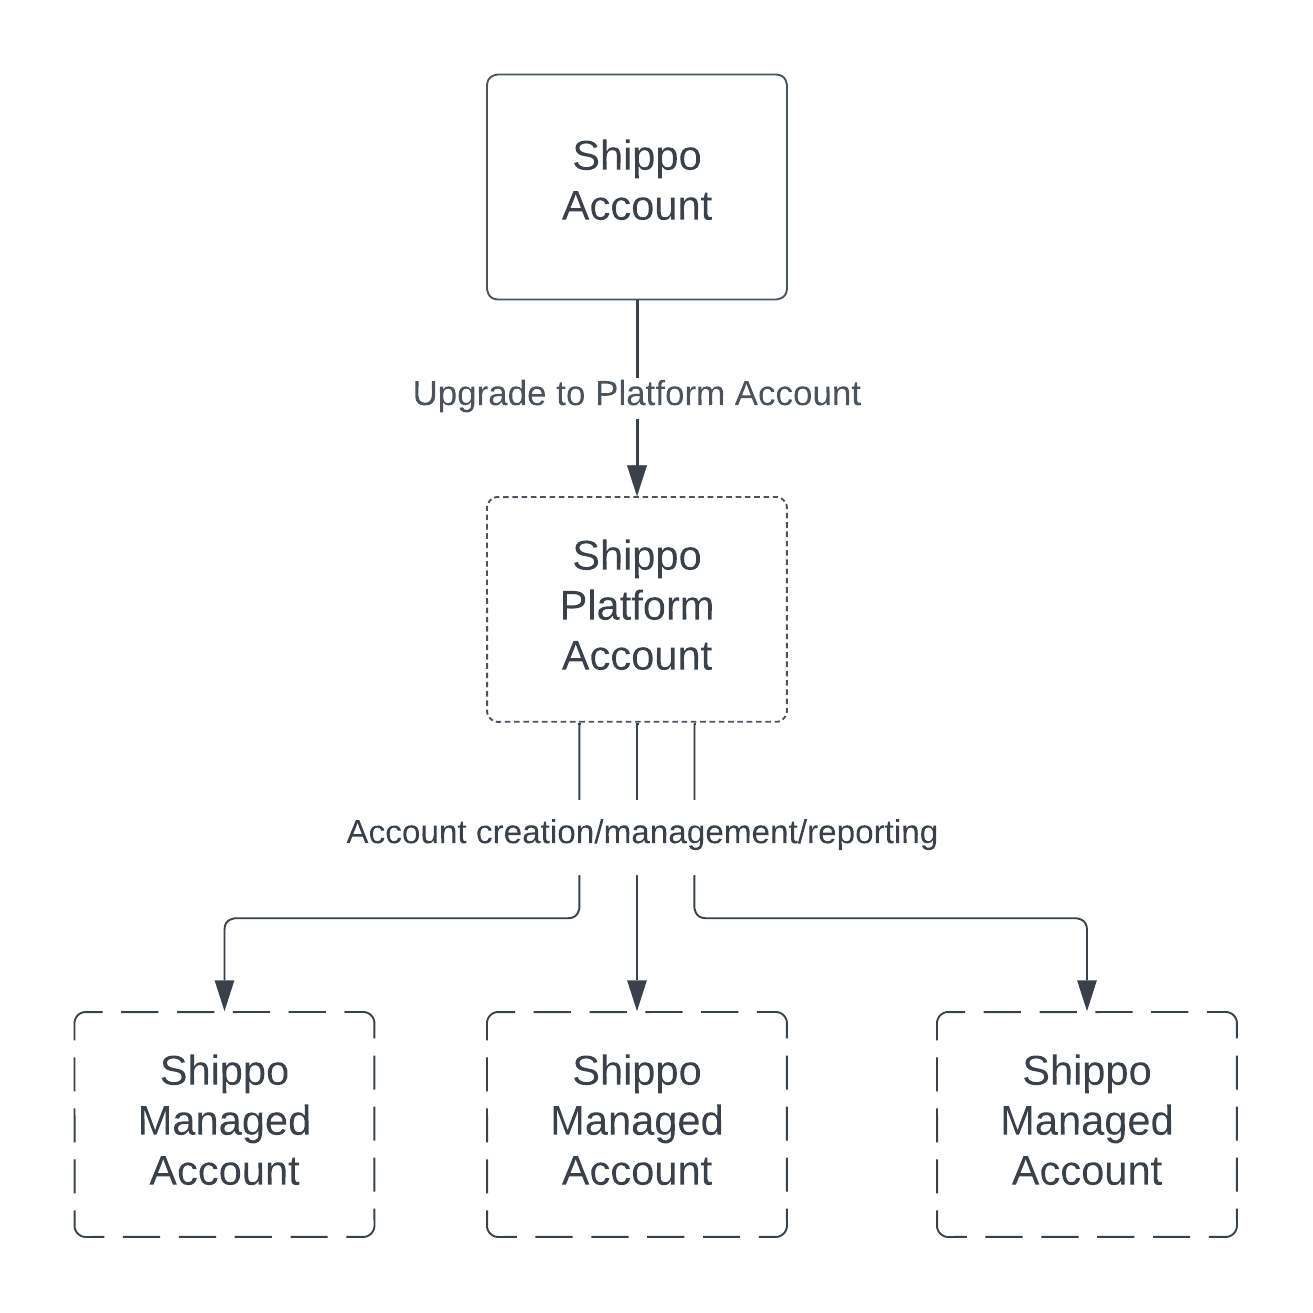 Flow diagram showing how Shippo accounts are upgrade to platform accounts to control shippo managed accounts